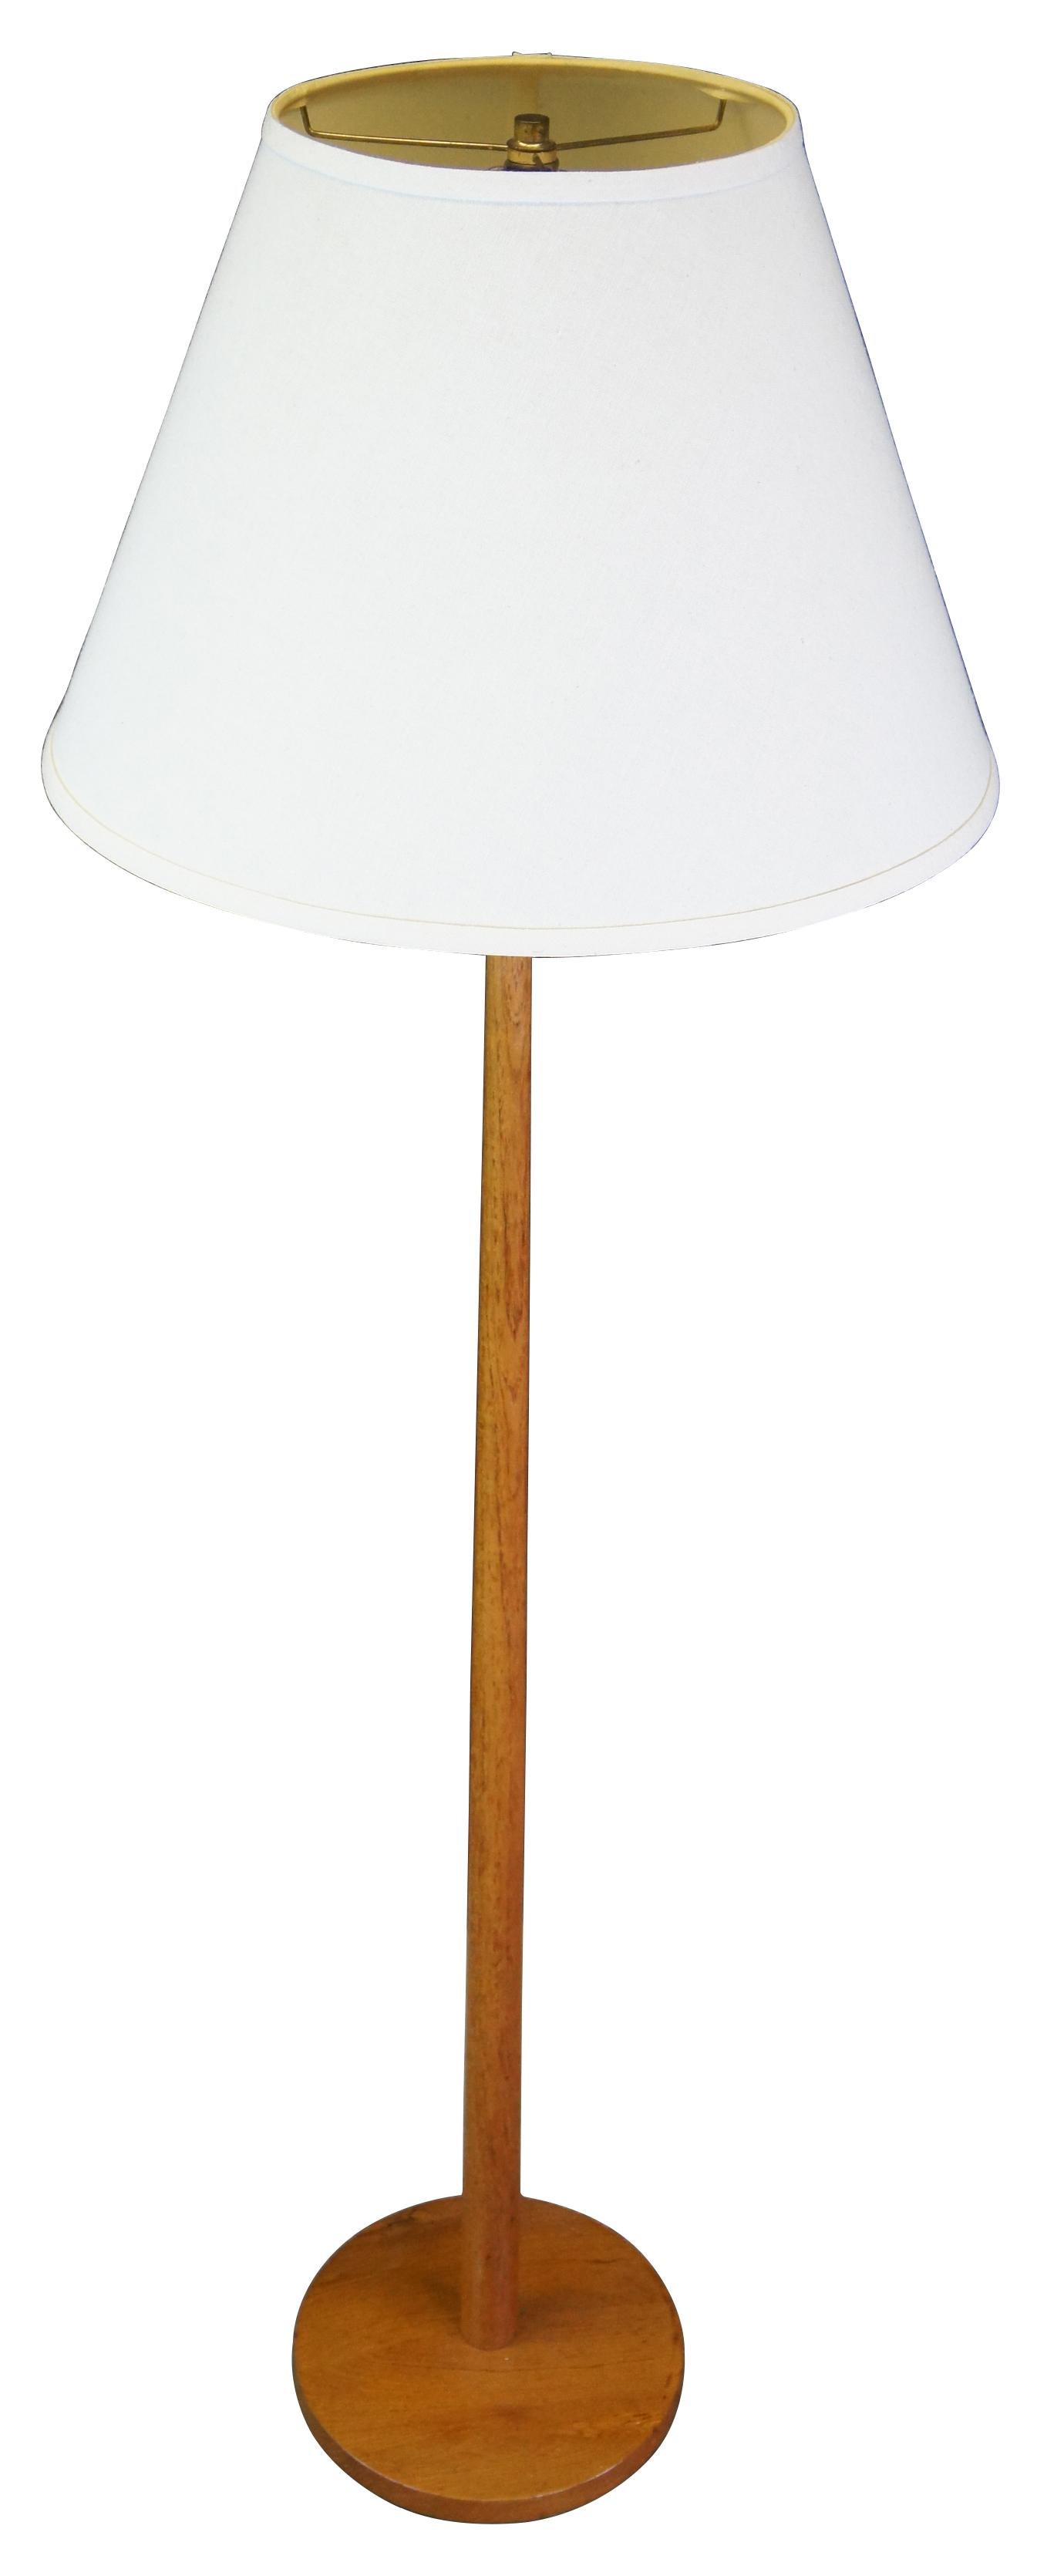 Minimalist Swedish modern floor lamp, circa 1960s. Made in Sweden for George Kovacs. A sleek design with rich wood and white shade. Measures: 56